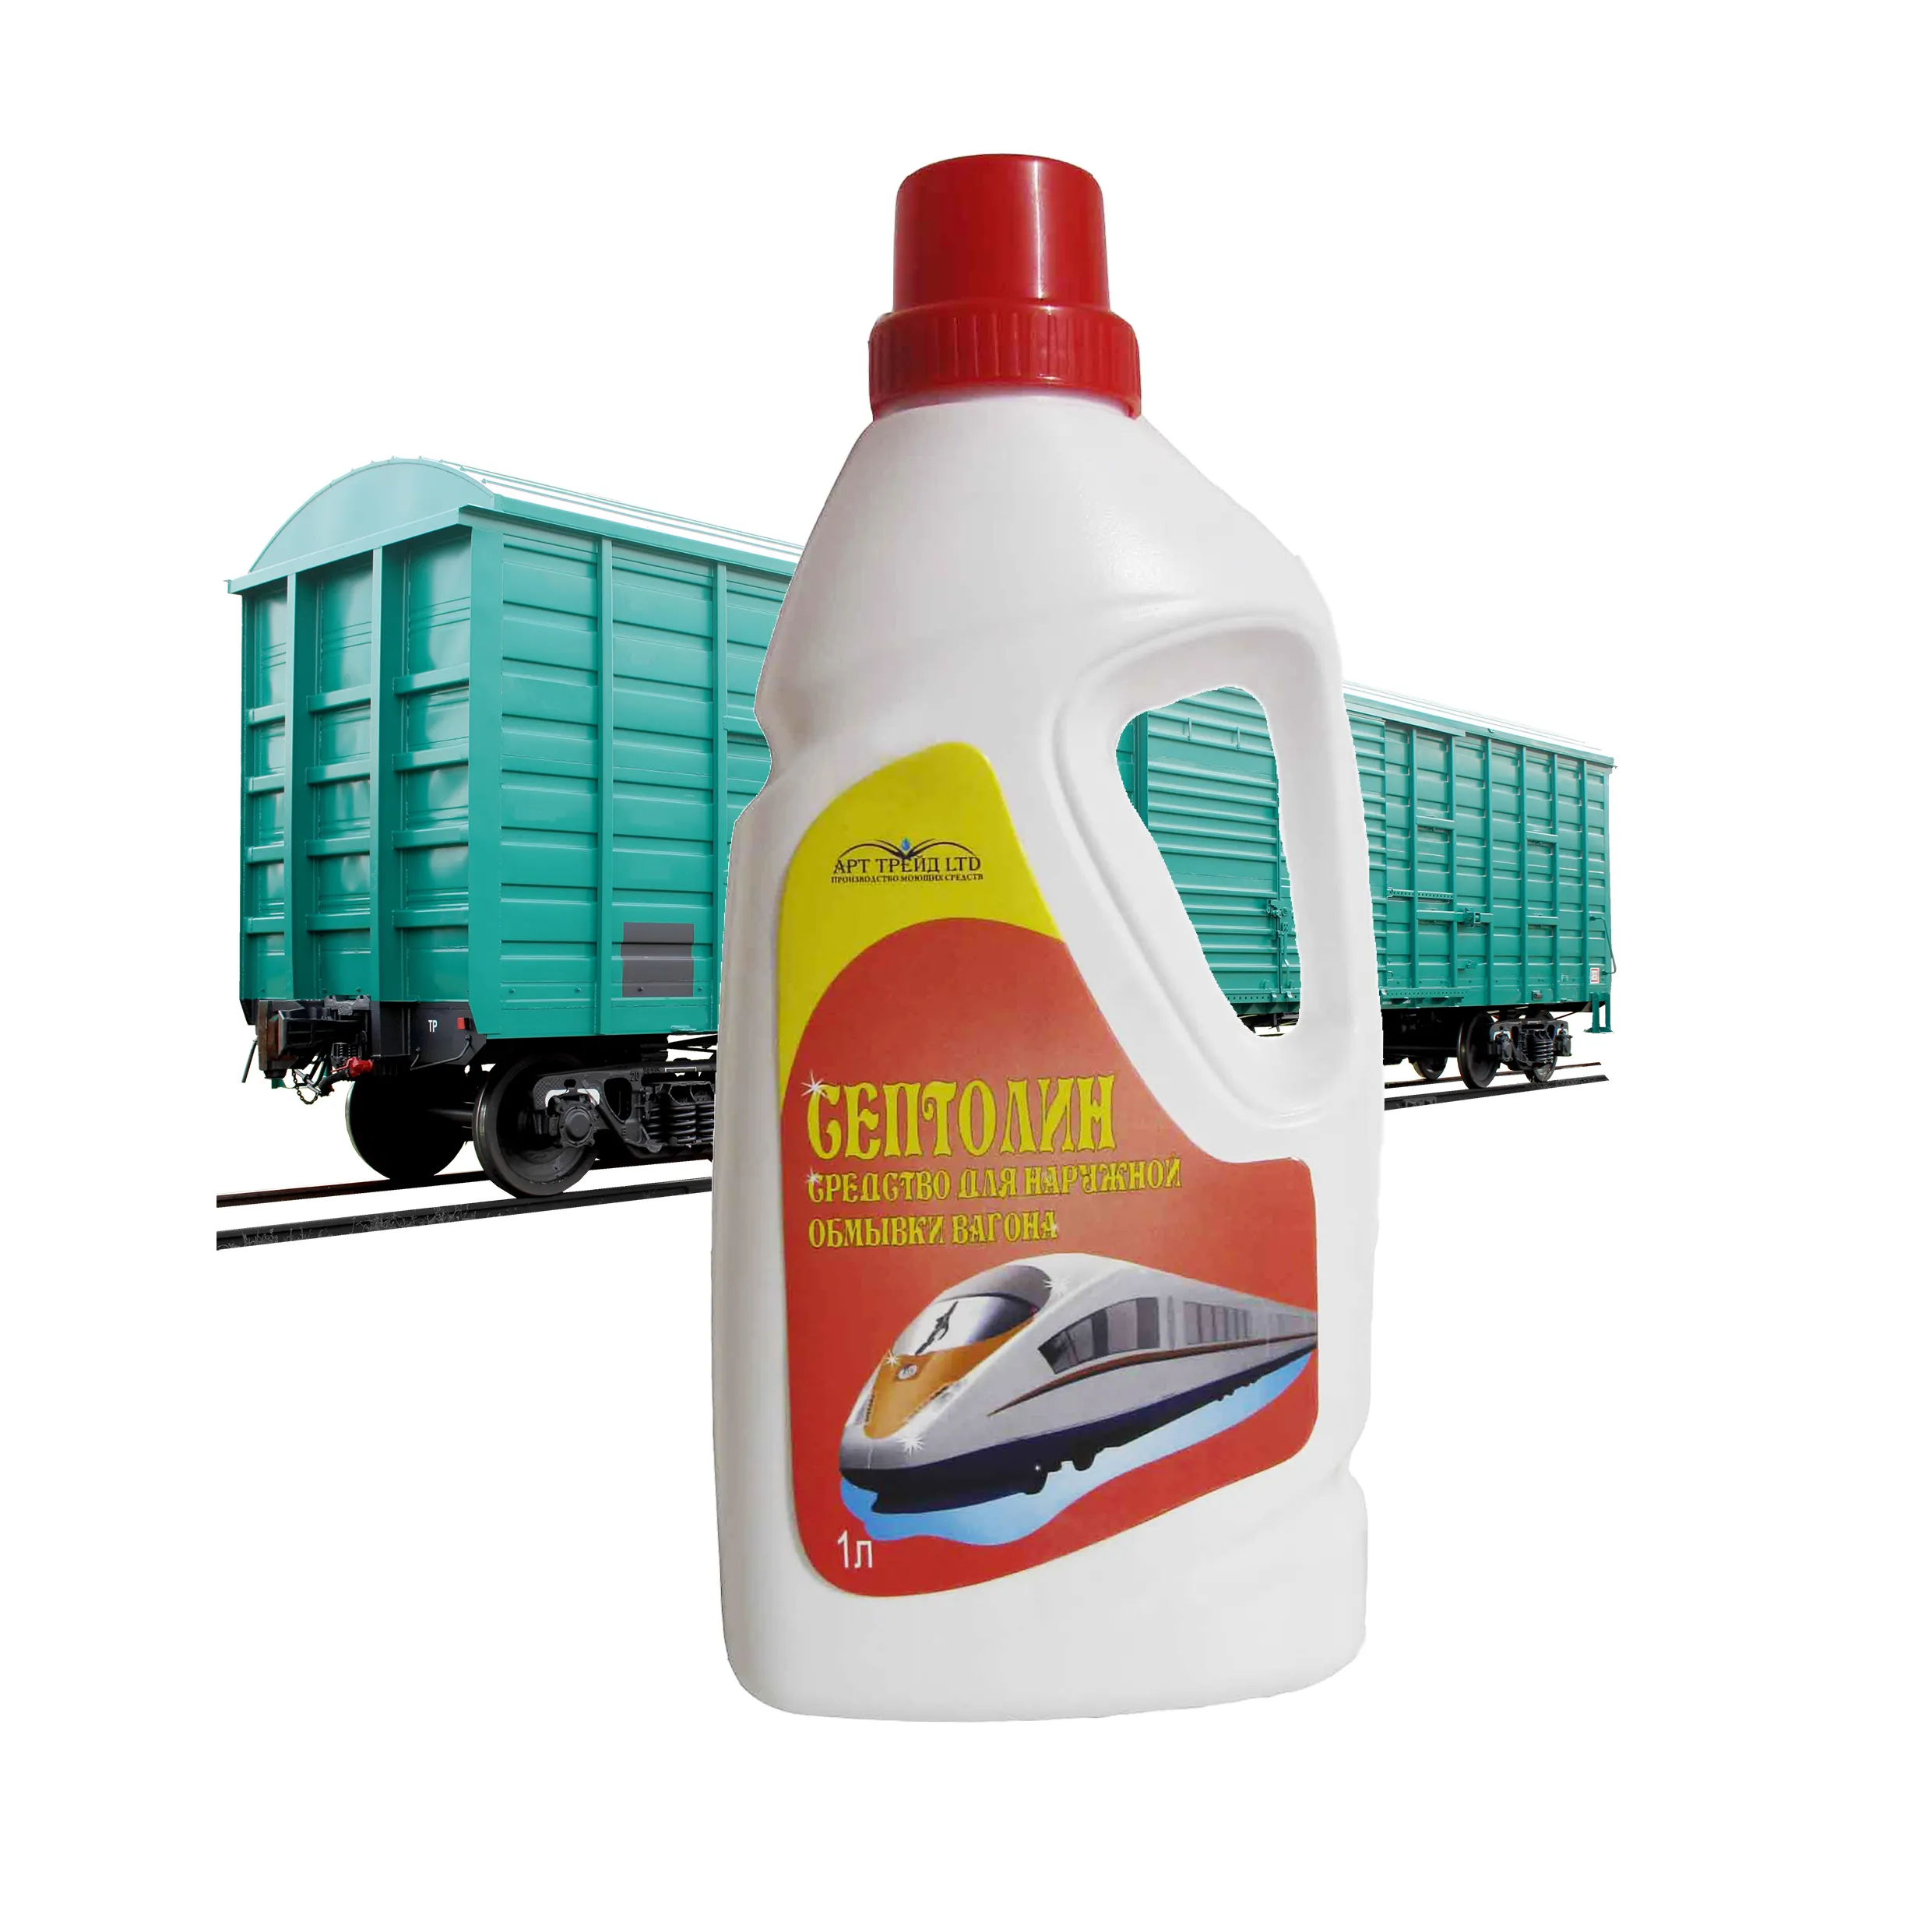 Train carriage cleaning agent  for traces rust and lime deposits oily contamination removing  metal corrosion inhibitor